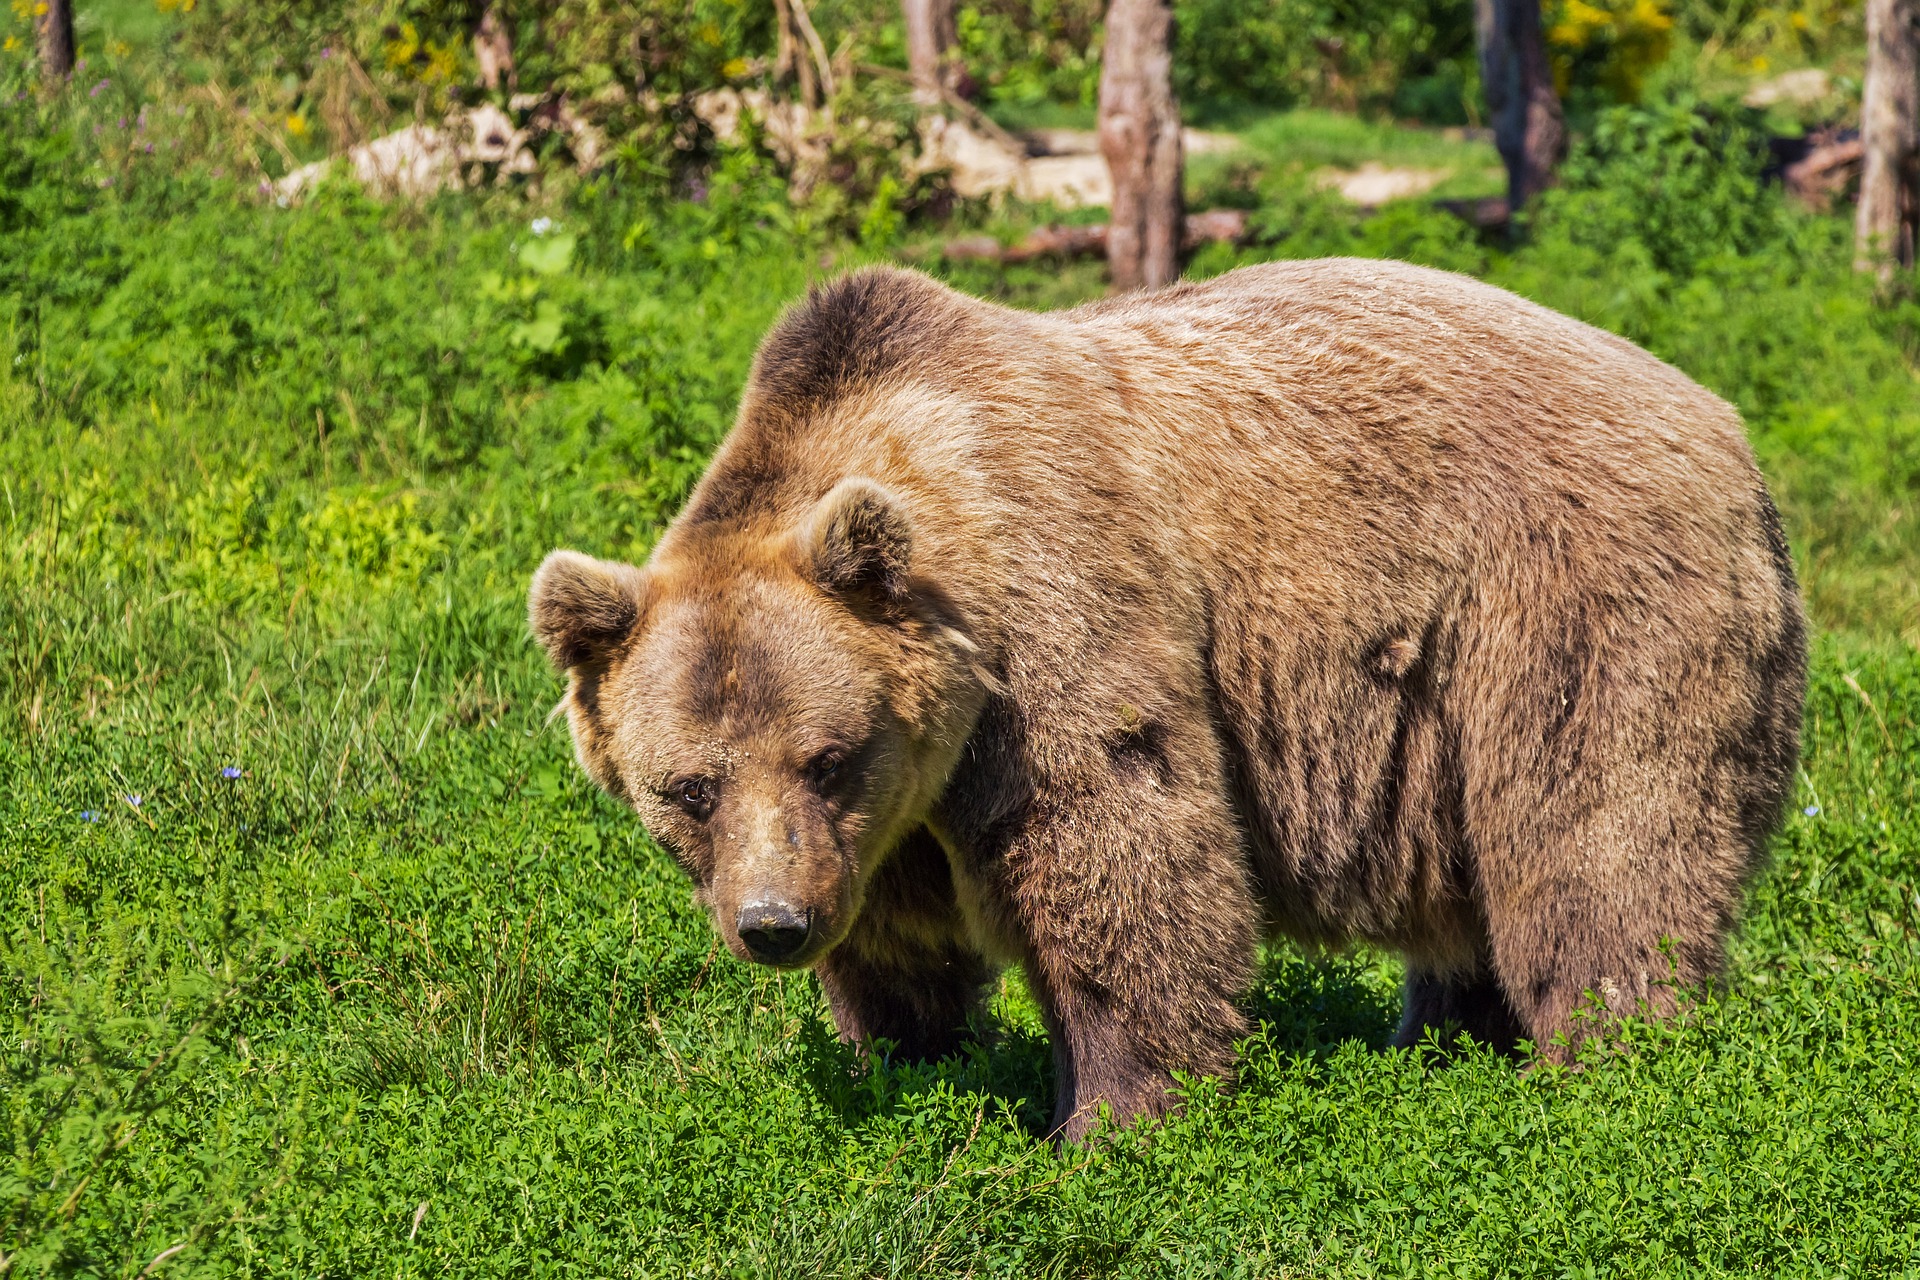 Brown Bear Sightings Are Becoming More Frequent